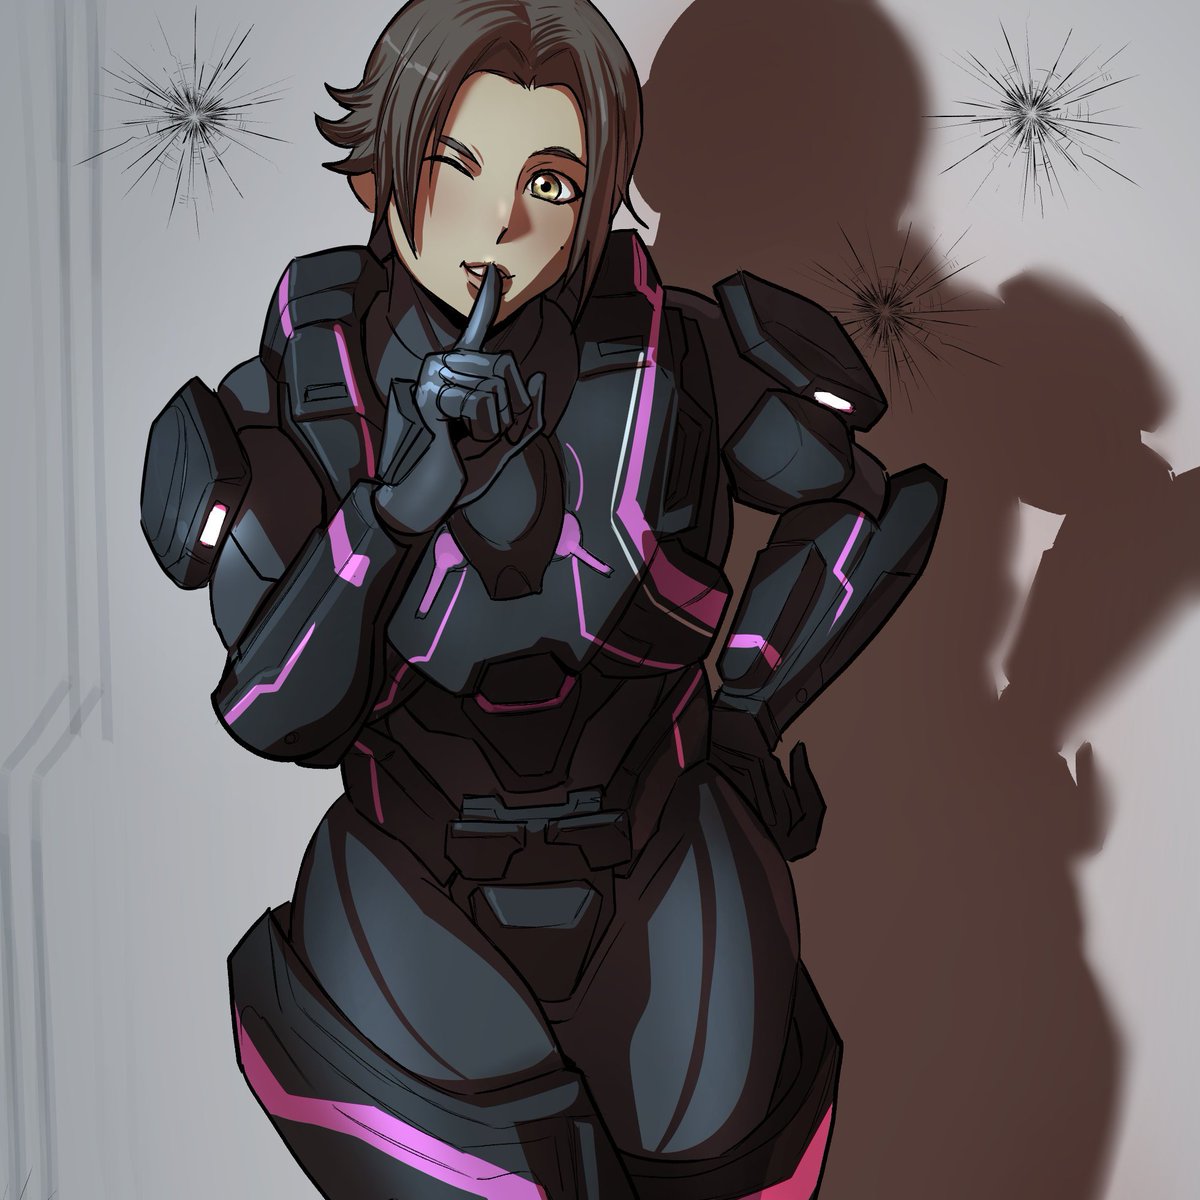 POV: You're on an exciting first date with your Spartan-III girlfriend and she's asking you to take a picture of her after a firefight with insurgent-aligned mercenaries. Art by @TexD41!